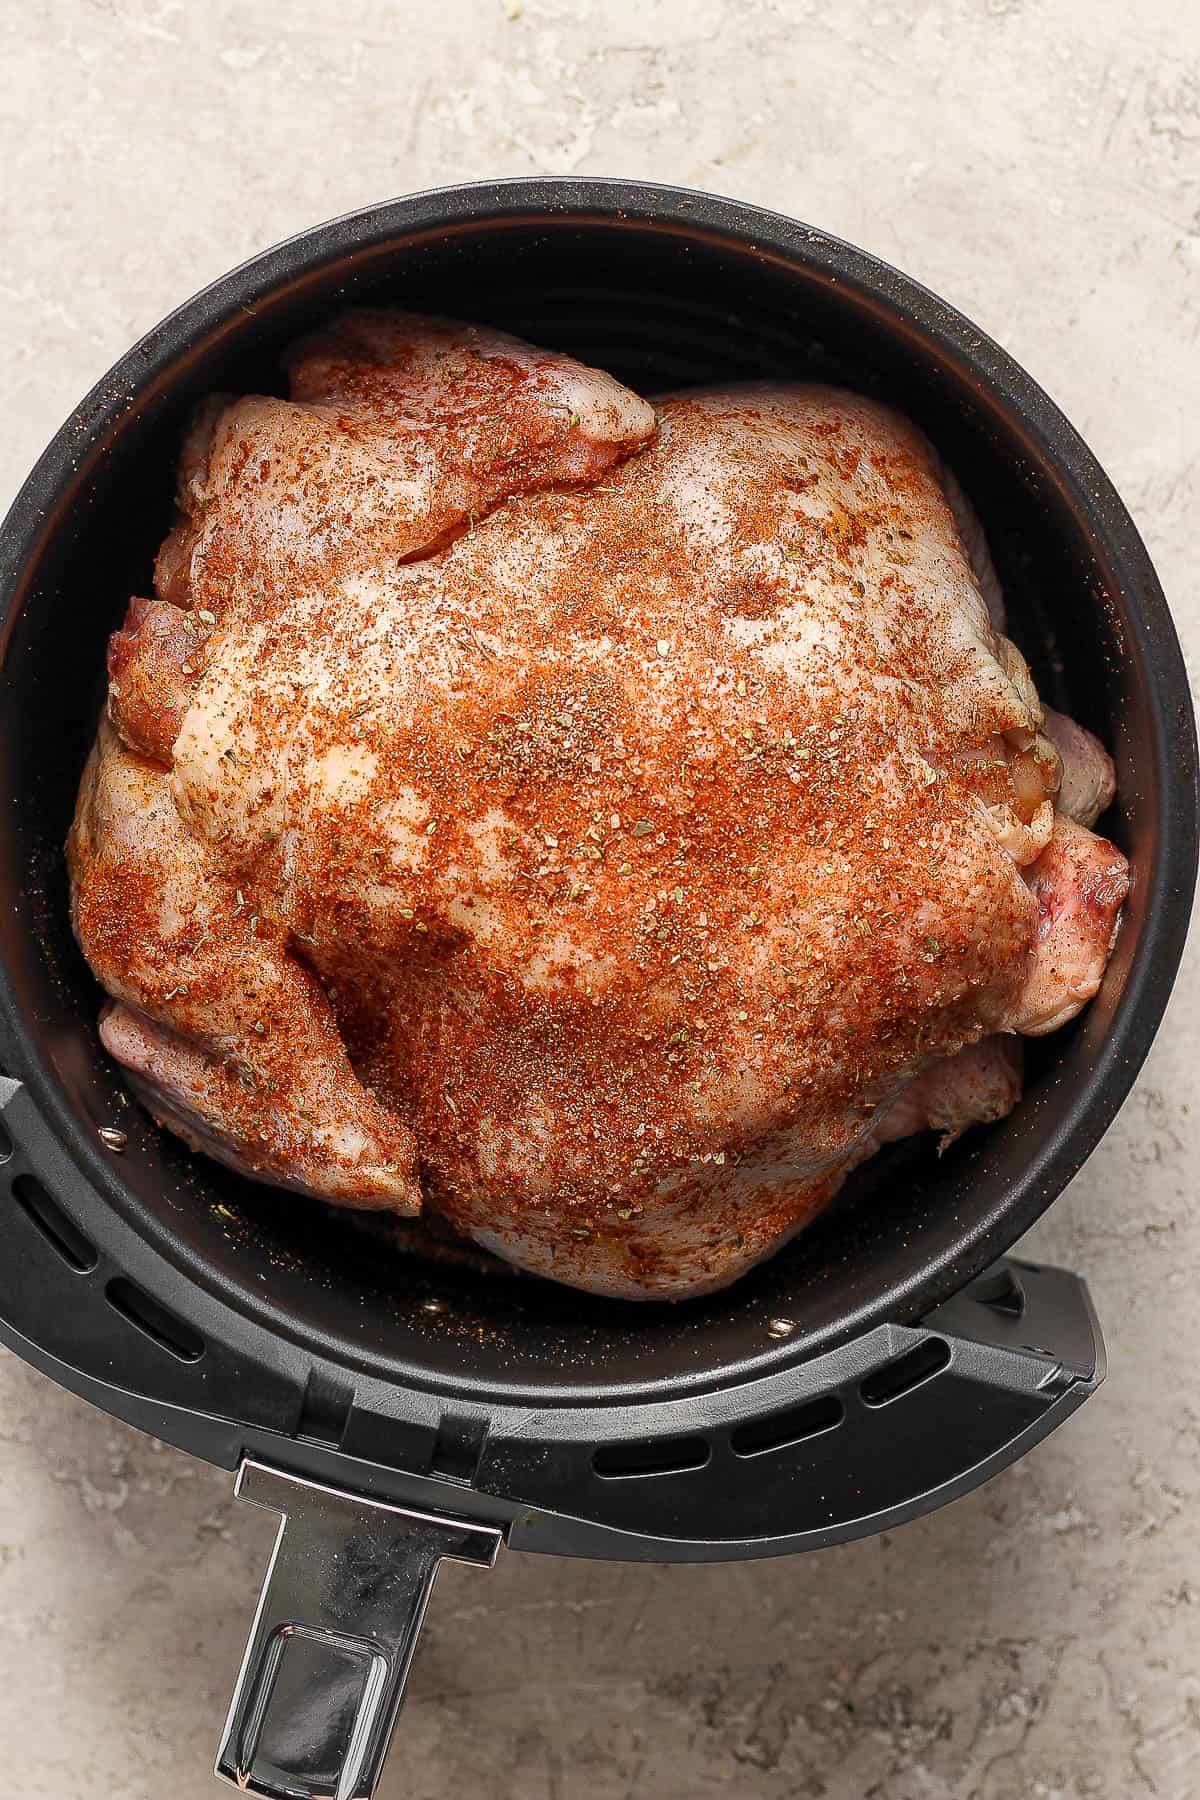 A seasoned chicken in the basket of an air fryer before being cooked.